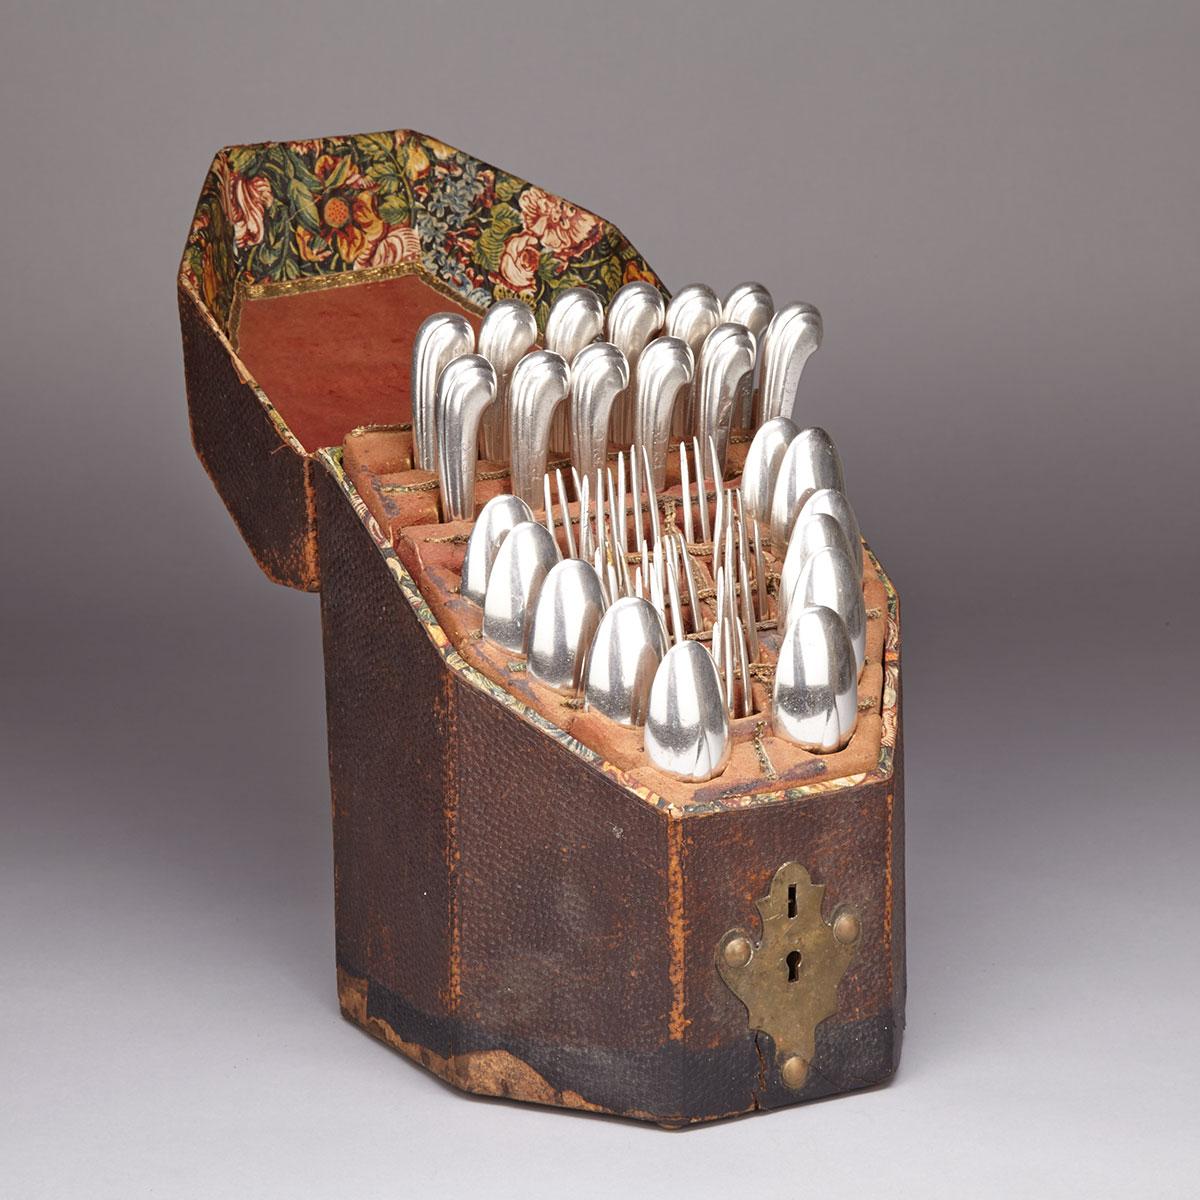 Twelve Continental Silver Knives, Twelve Forks and Eleven Spoons late 18th century